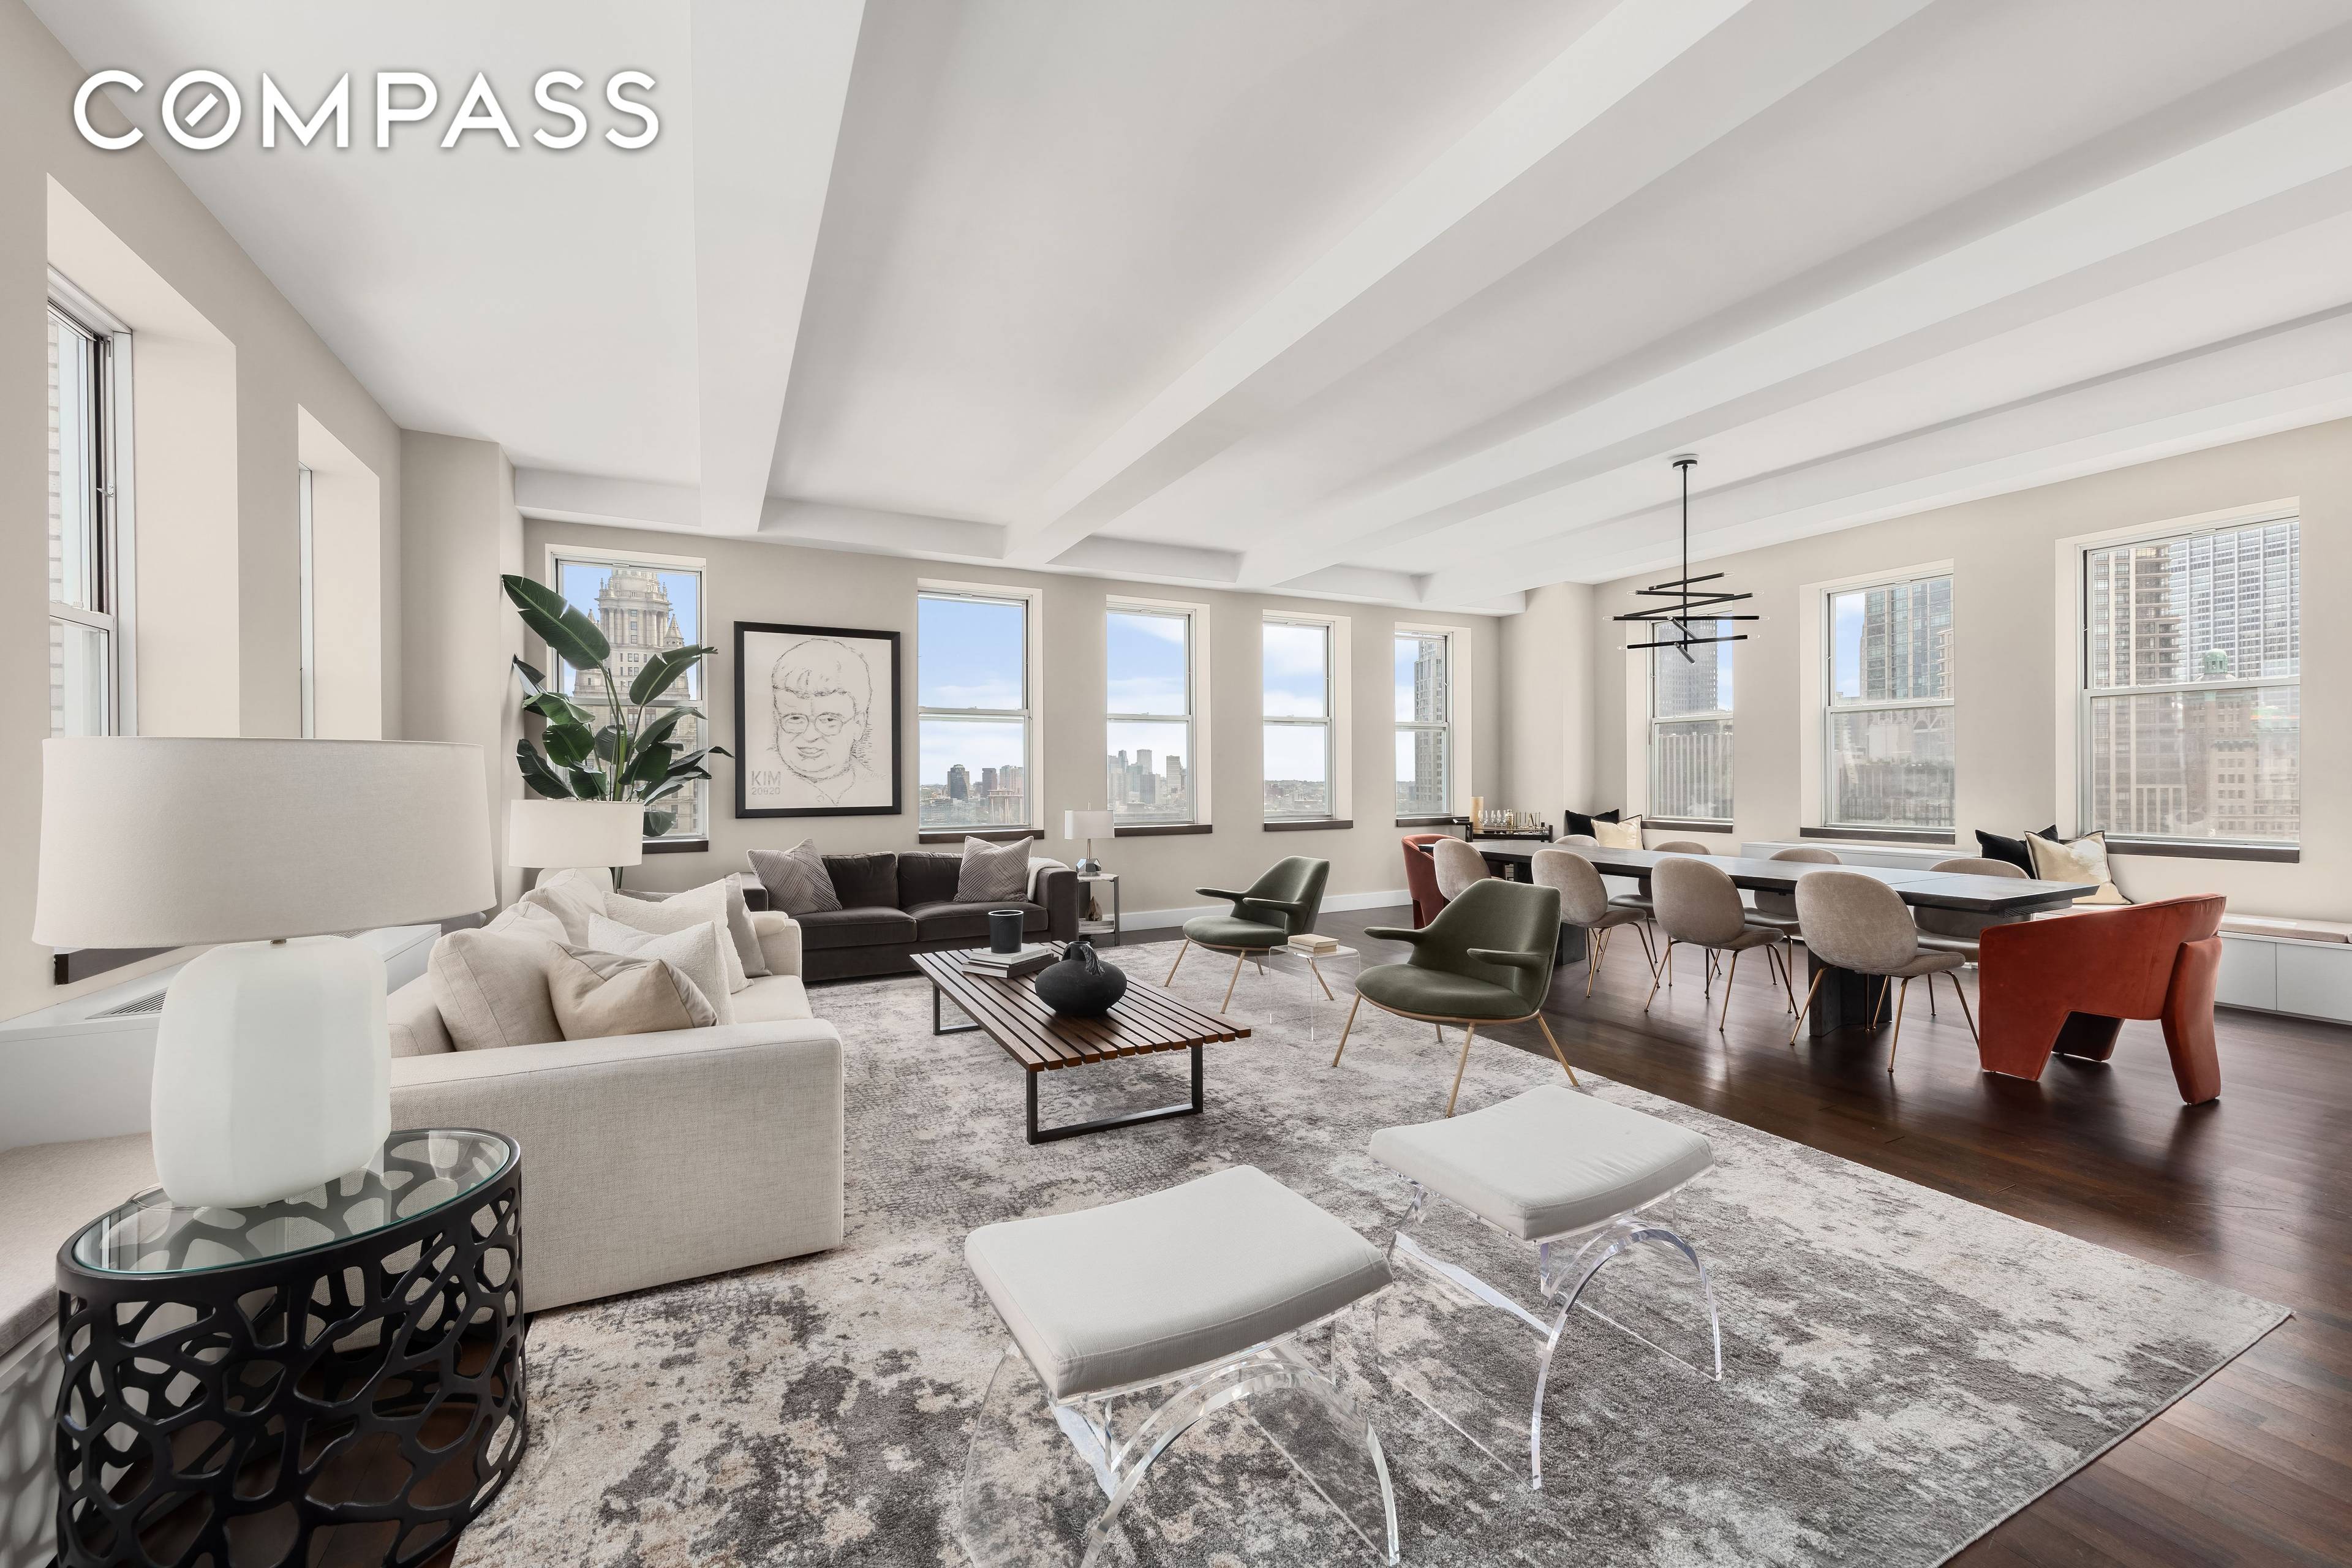 Welcome to this spacious 3, 500sqft TriBeCa loft with unobstructed southern, northern, and eastern exposures.